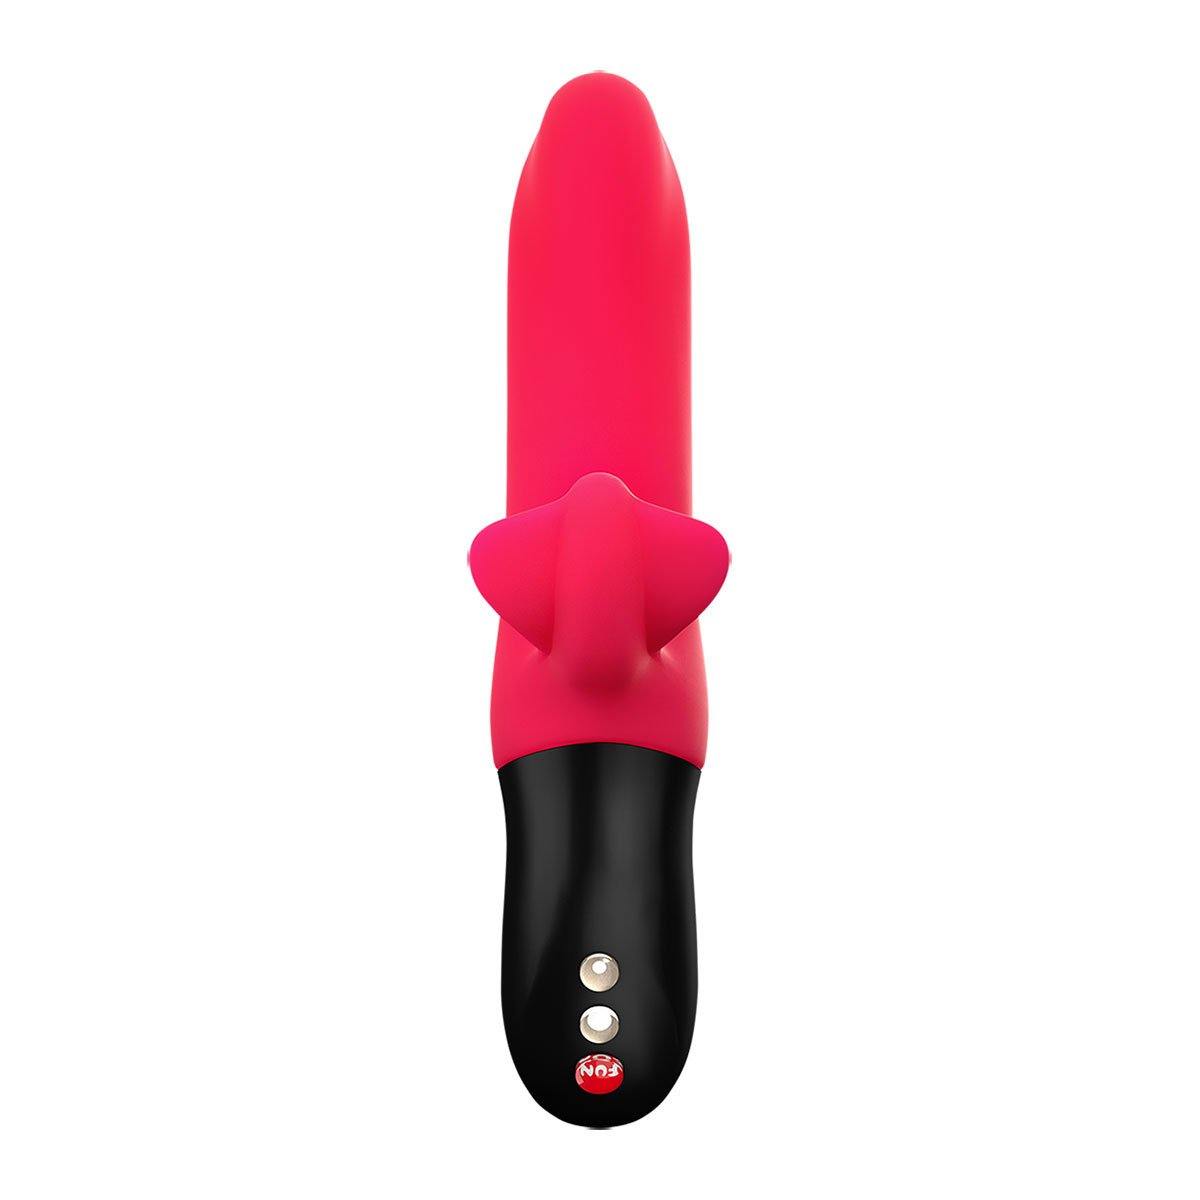 Fun Factory BI Stronic Fusion - Buy At Luxury Toy X - Free 3-Day Shipping